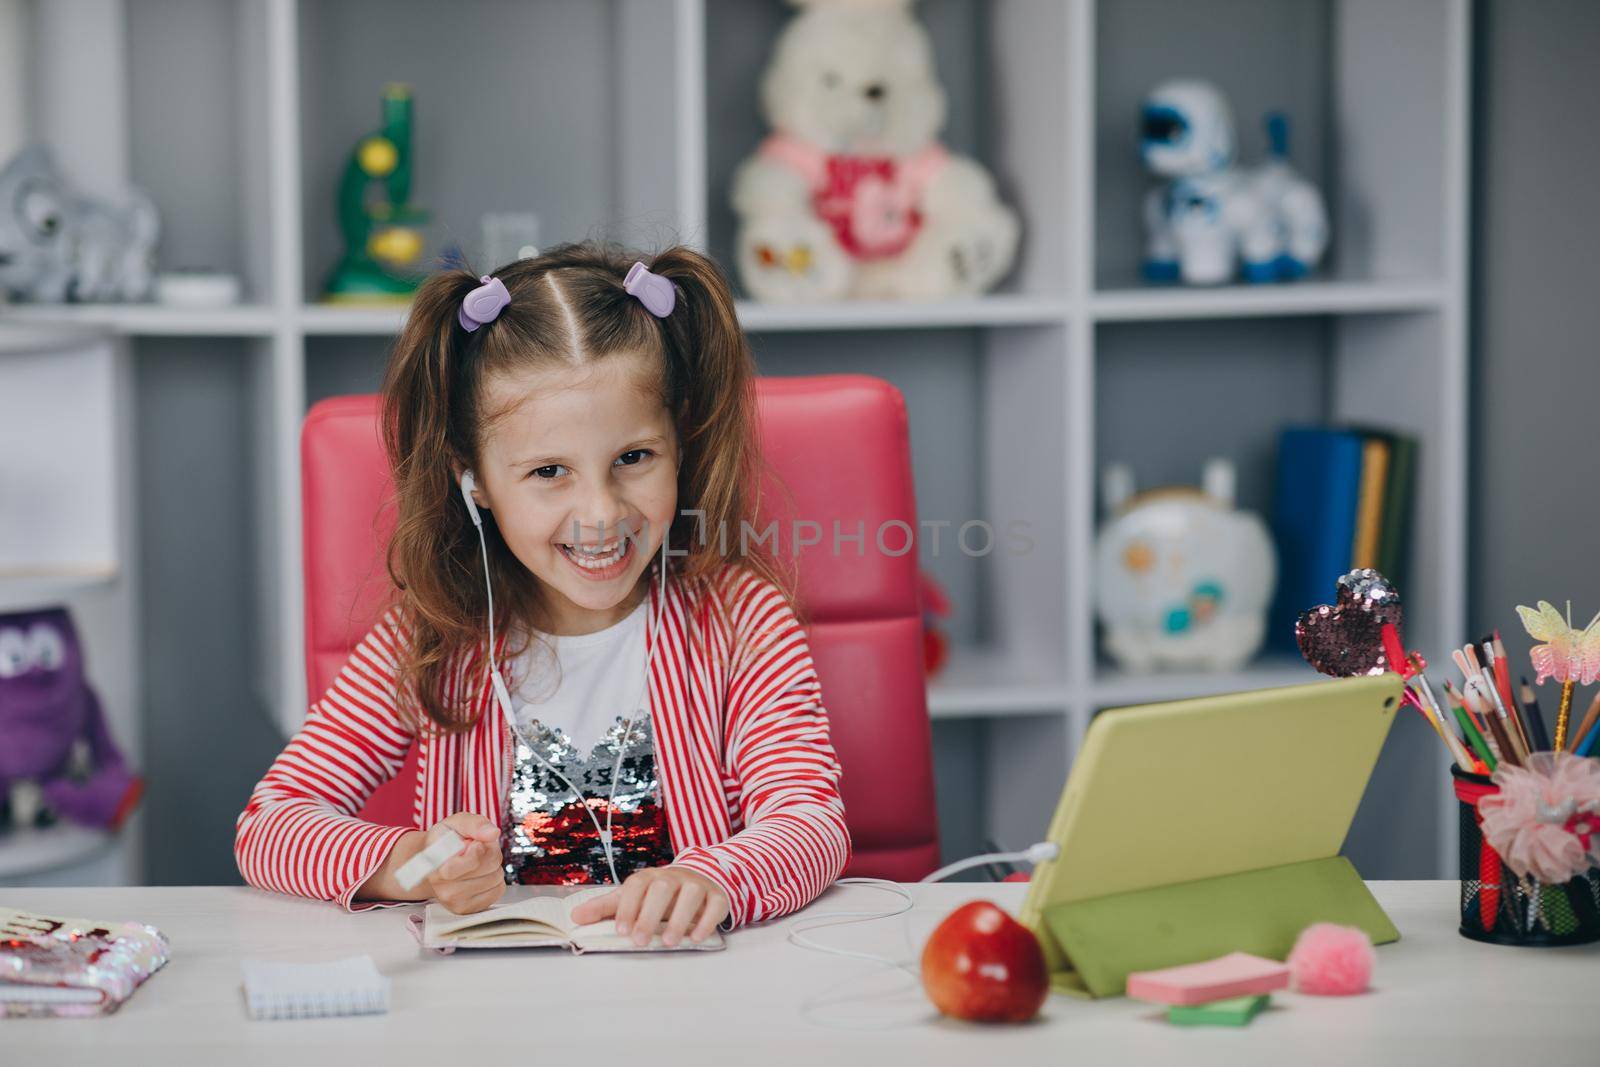 Distance learning, school online. Portrait of a preschool girl looking at the book and smiling. Self isolation and online schooling